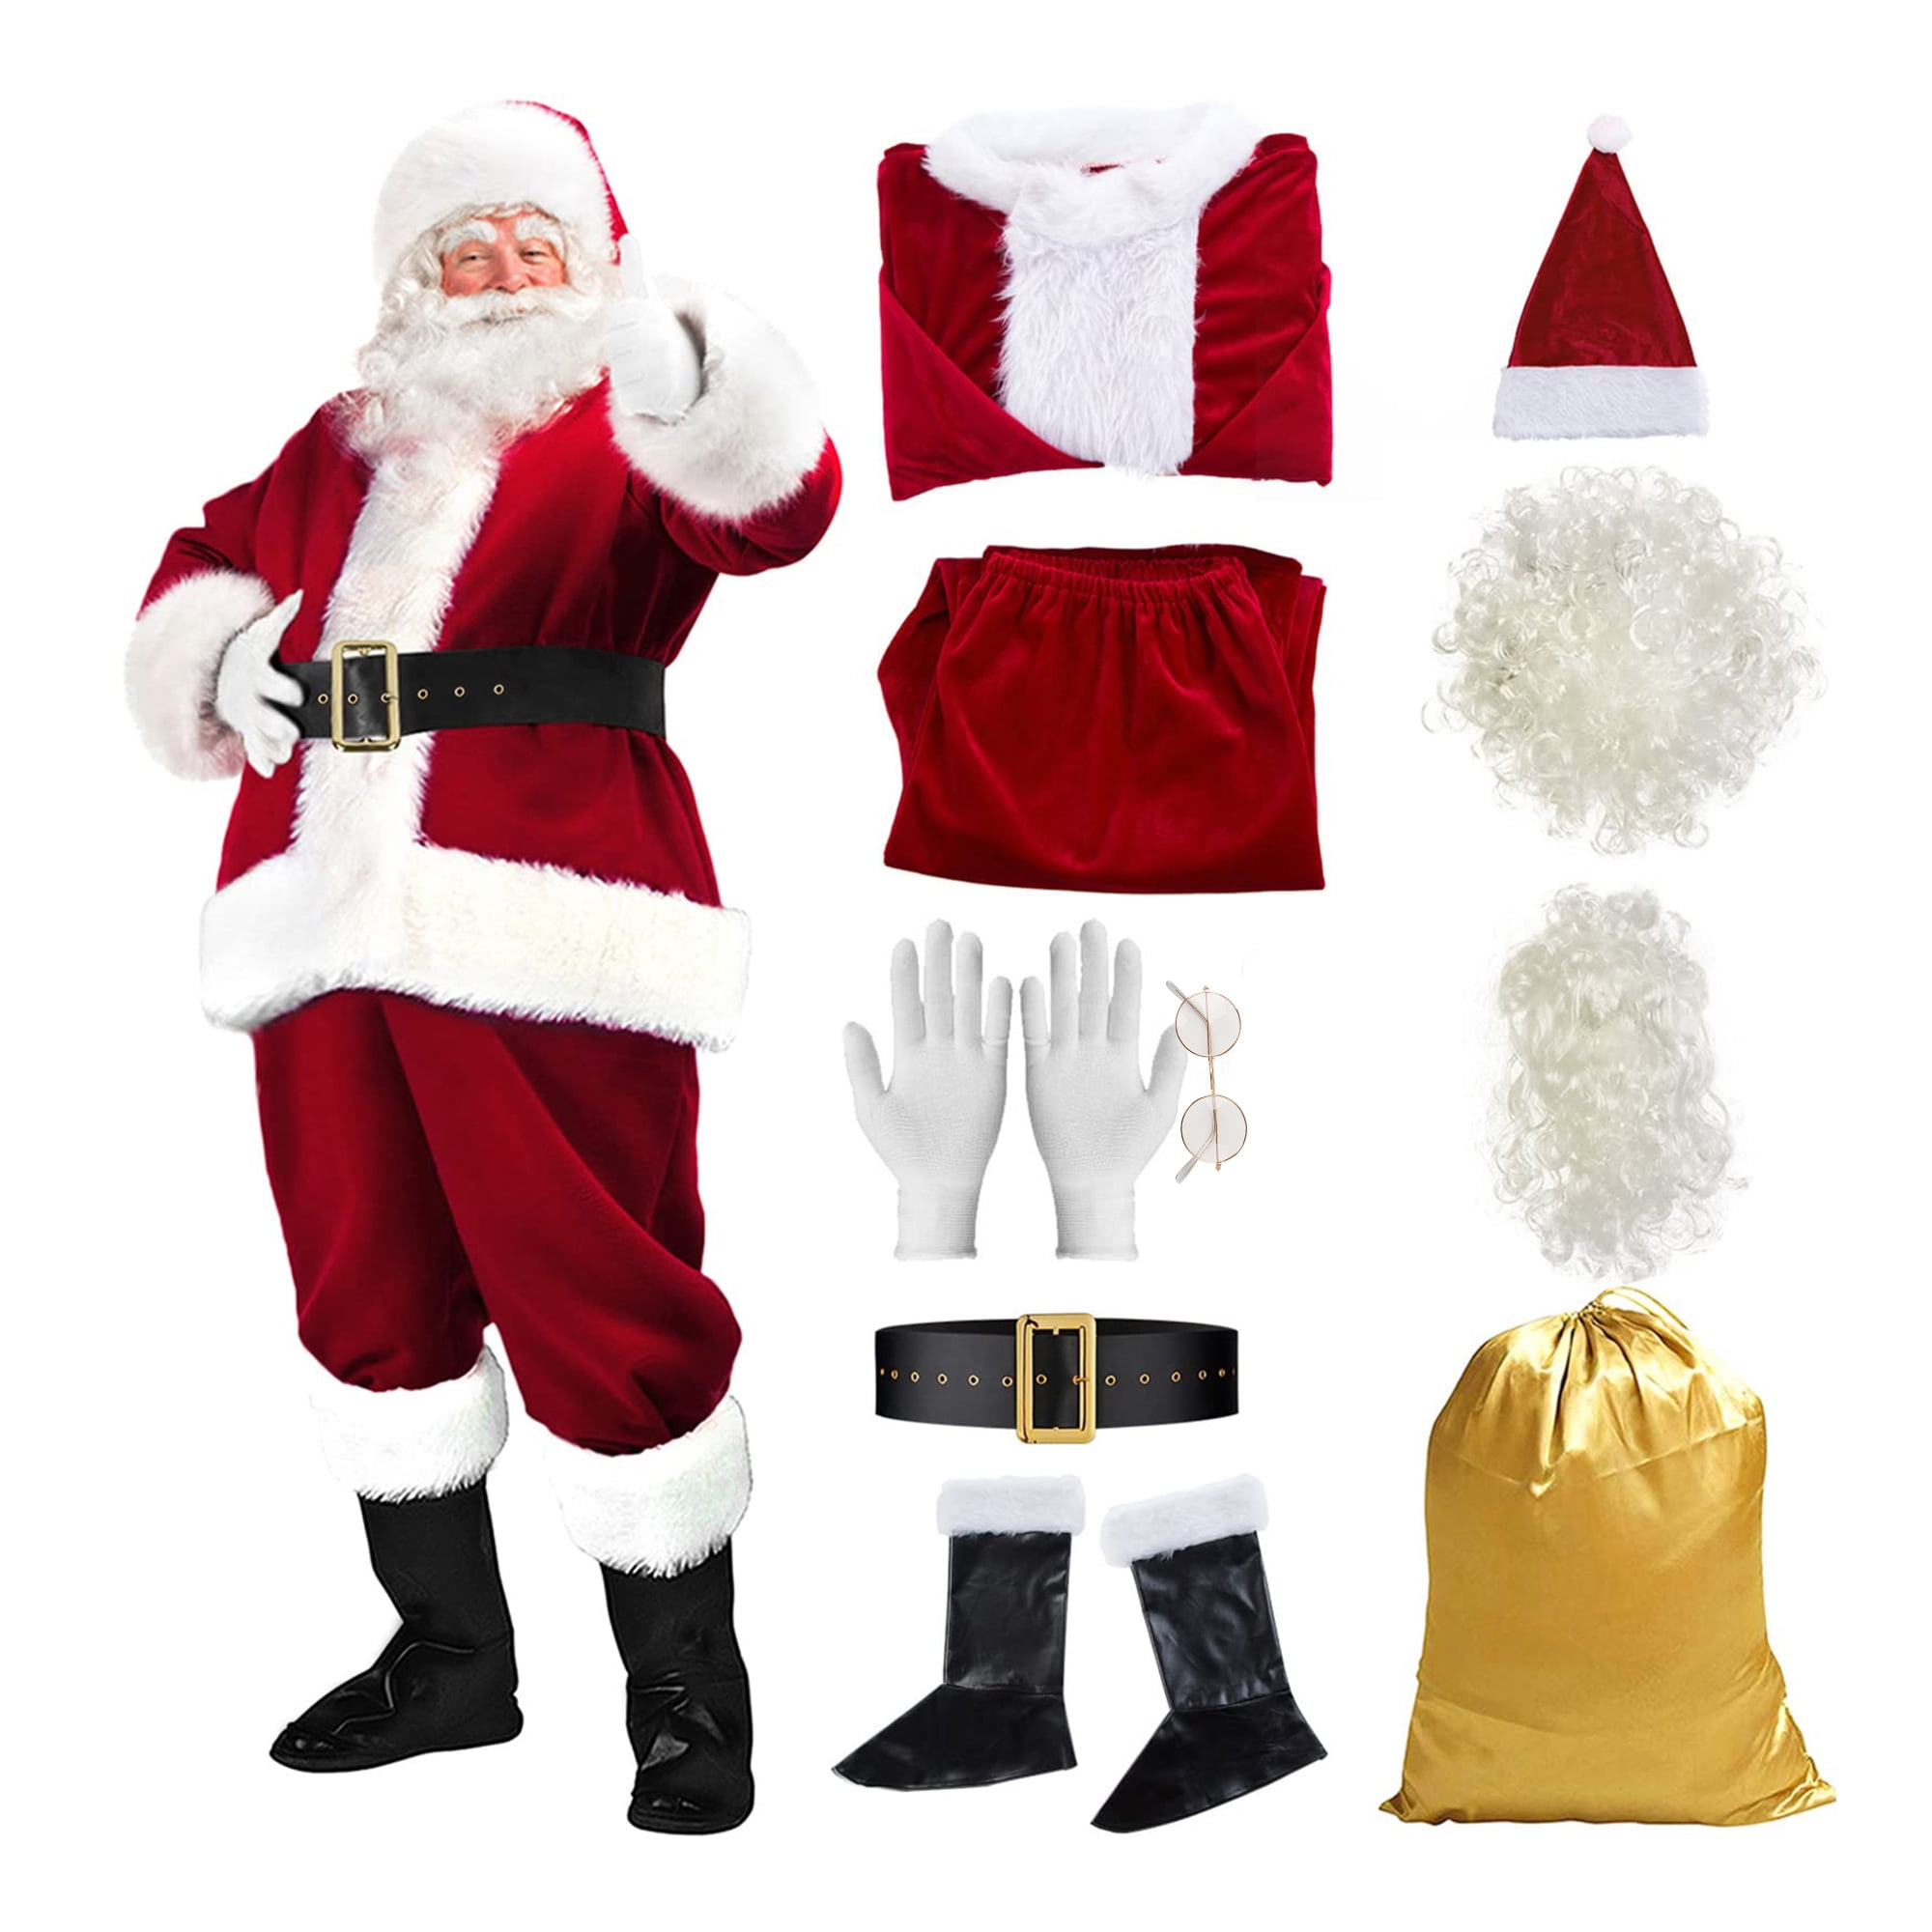 Orolay Mens Deluxe Santa Suit 10pc Christmas Adult Santa Claus Costume 